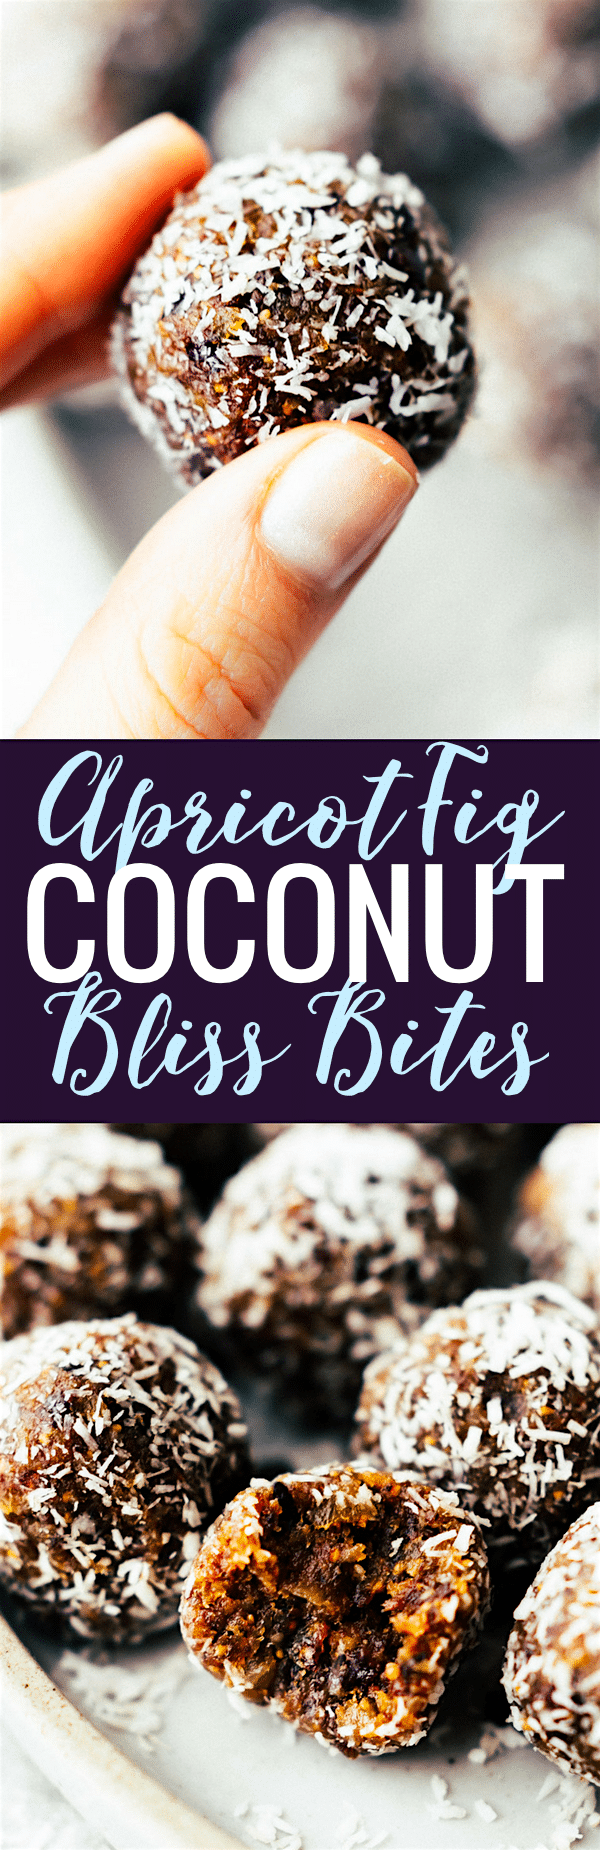 hese NO BAKE COCONUT APRICOT FIG BLISS BITES are the perfect superfood energy bites! No sugar added, just figs, coconut, apricots, nuts, pure dark chocolate, and a touch of sea salt. A quick wholesome snack to fuel your day!! Paleo, Vegan, and Whole 30 friendly. www.cottercrunch.com